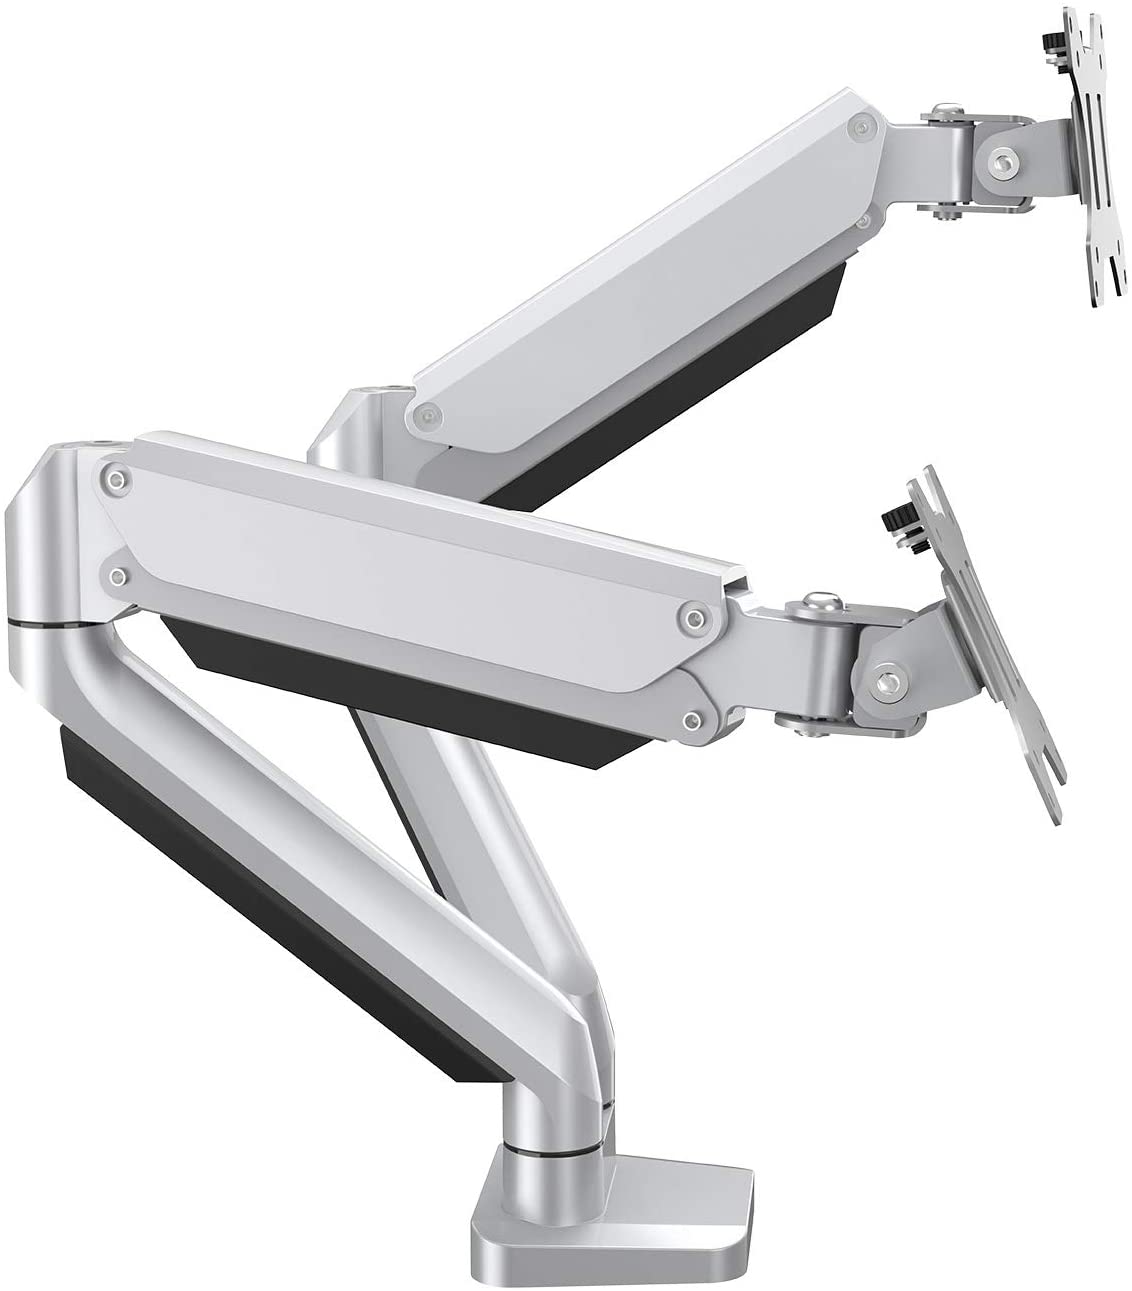 Dual Arms monitor desk mount for 2 monitors